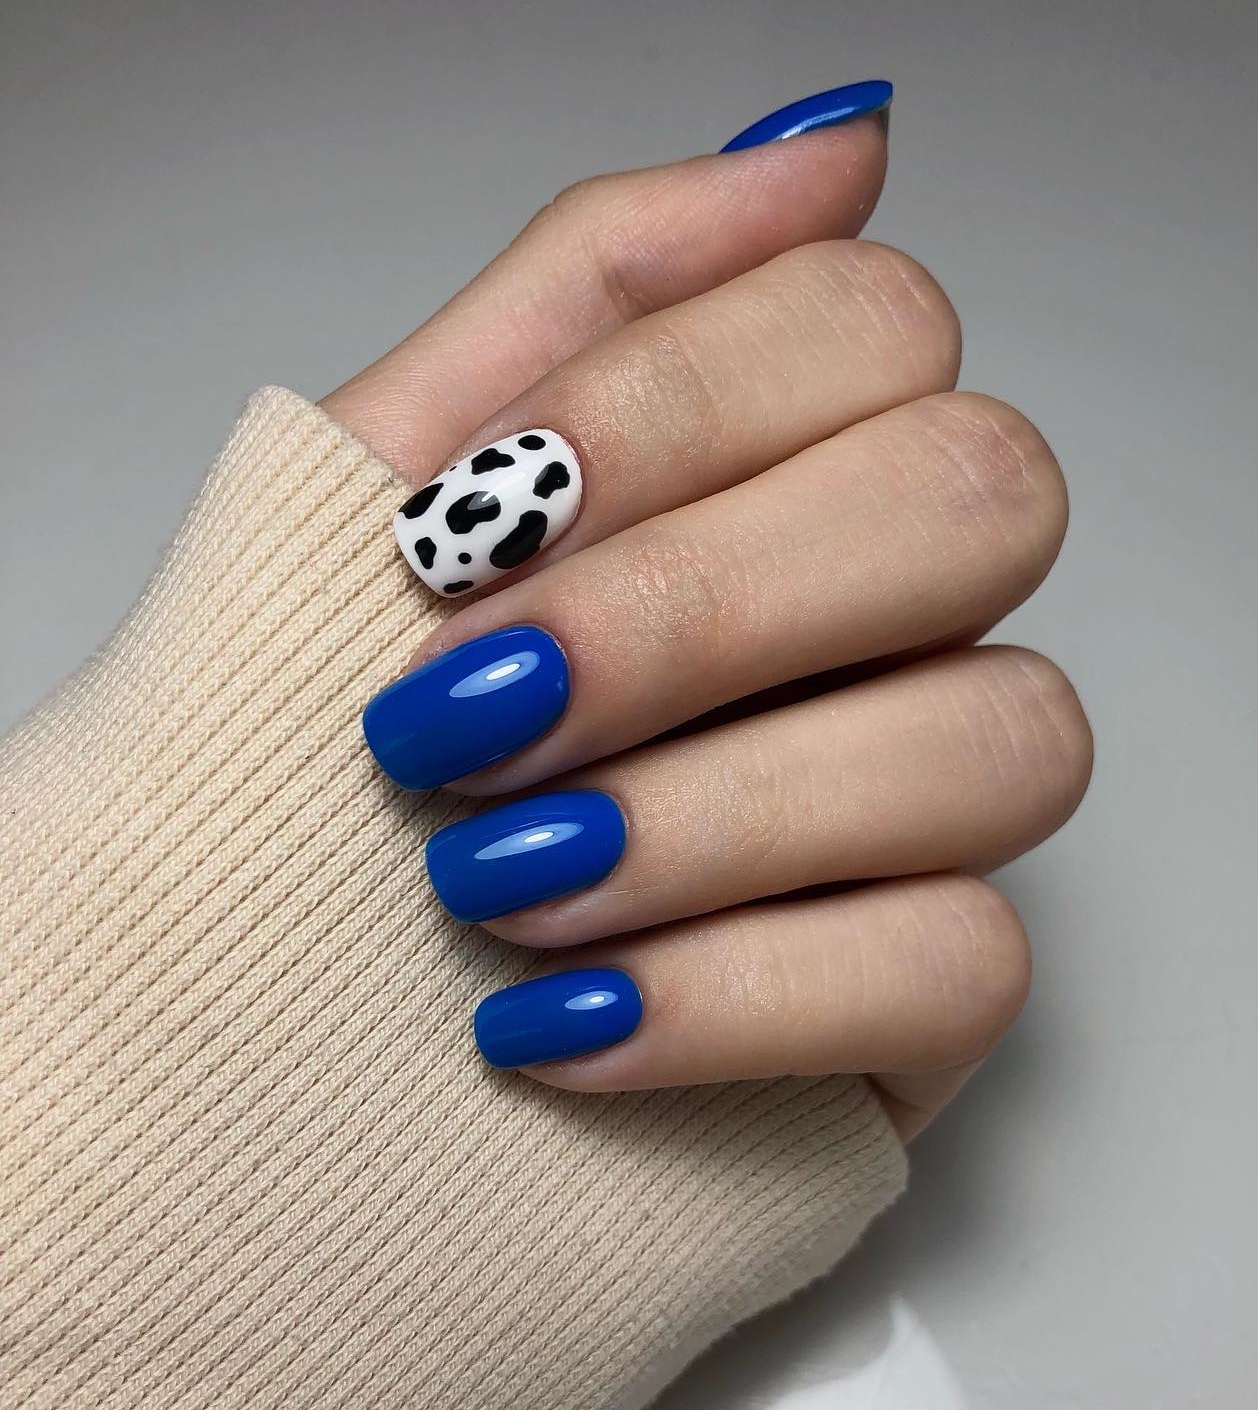 Royal Blue Nails with Black and White Cow Print